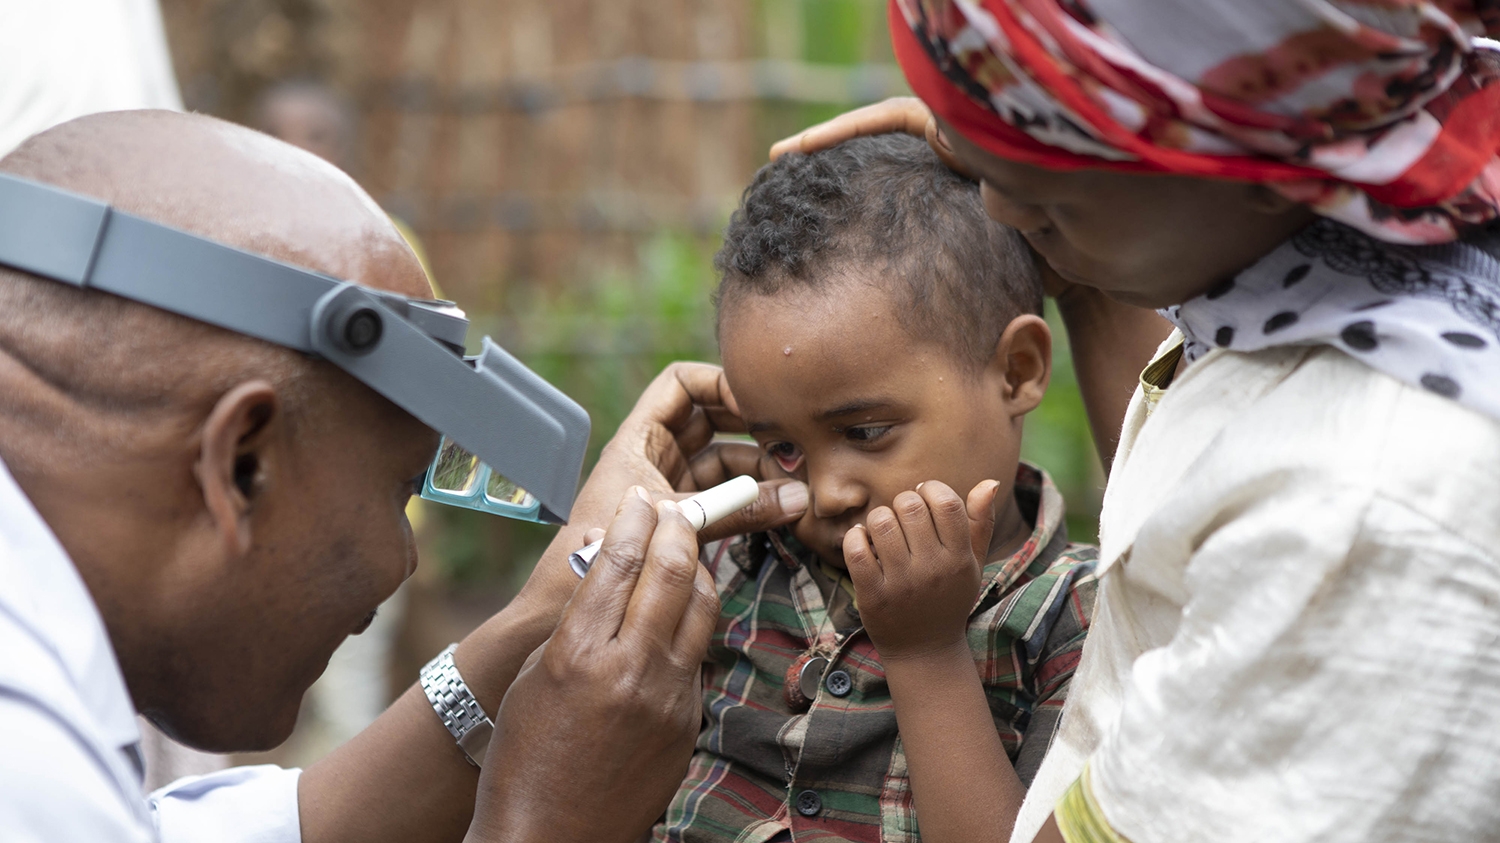 An eye health worker checks a young boy's eyes from signs of trachoma at a community screening session in Ethiopia.